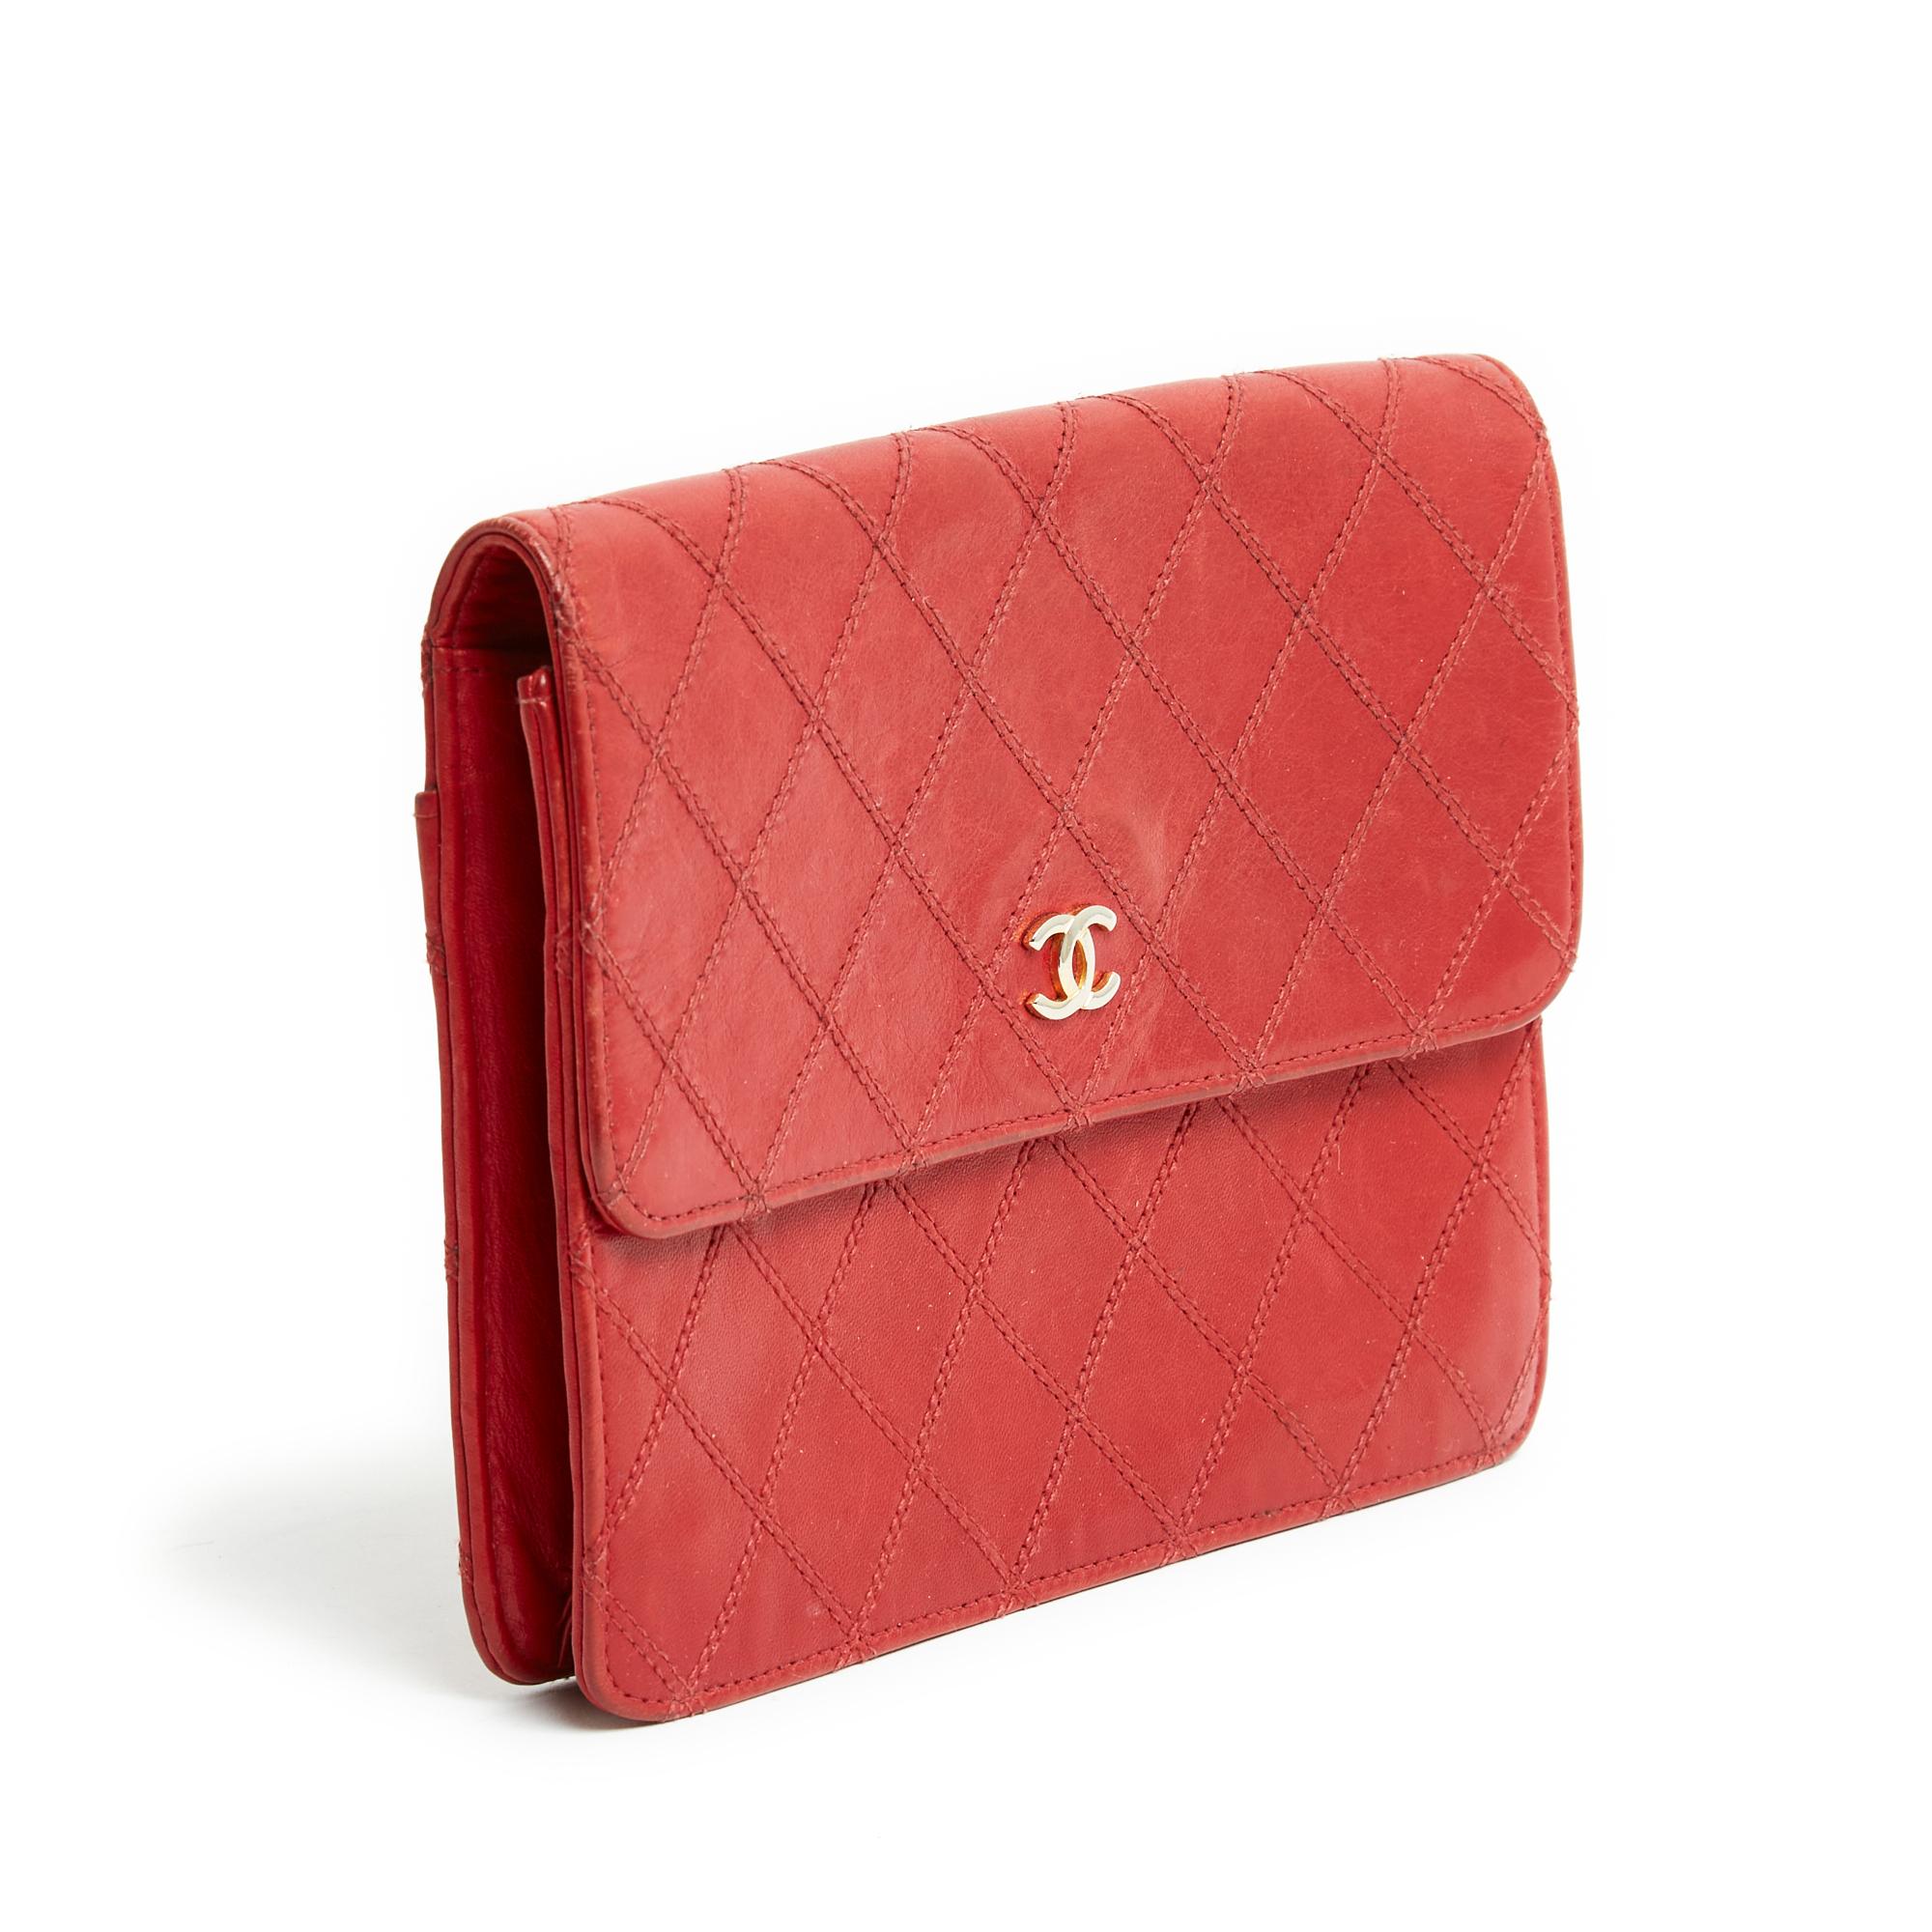 Chanel Timeless or Classic series clutch in red quilted leather, front flap with snap clasp decorated with a CC in gold metal, interior in burgundy red leather and canvas with 1 zipped pocket, large patch pocket on the back. Width 17 cm x height 14